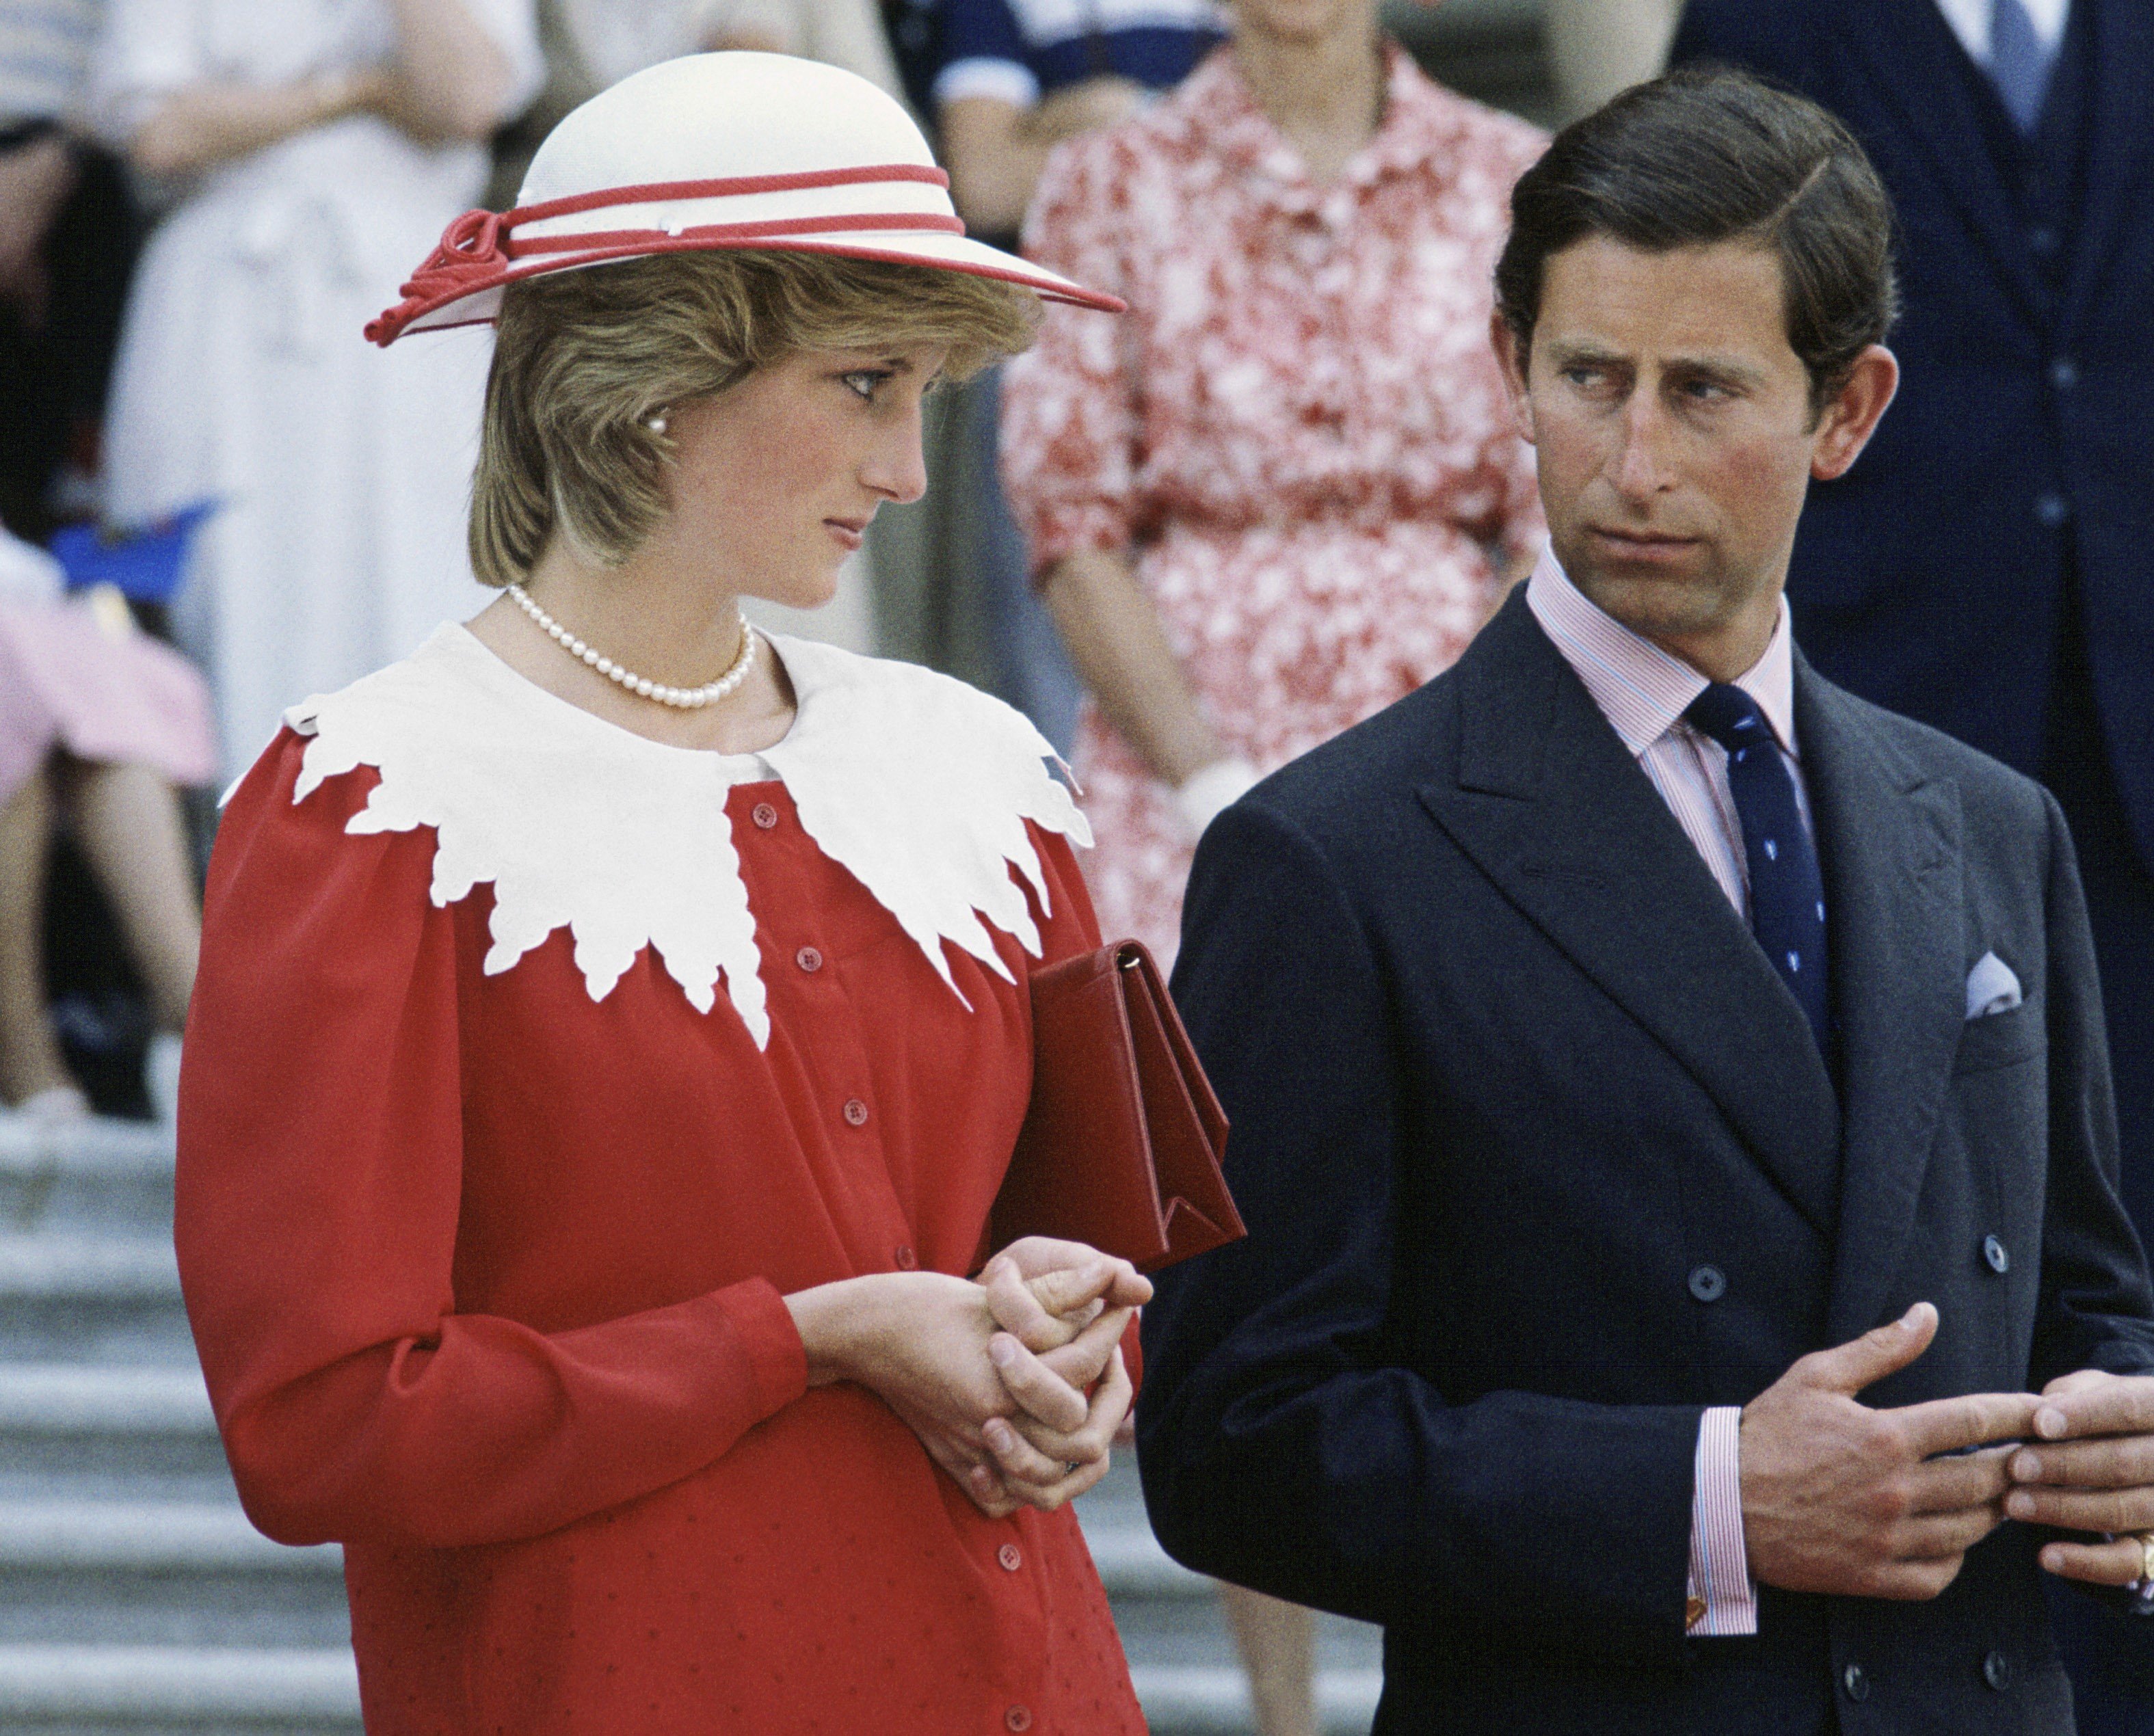 Princess Diana and Prince Charles, who the public may never forgive for the way he treated his first wife, looking unhappy at an event in Canada